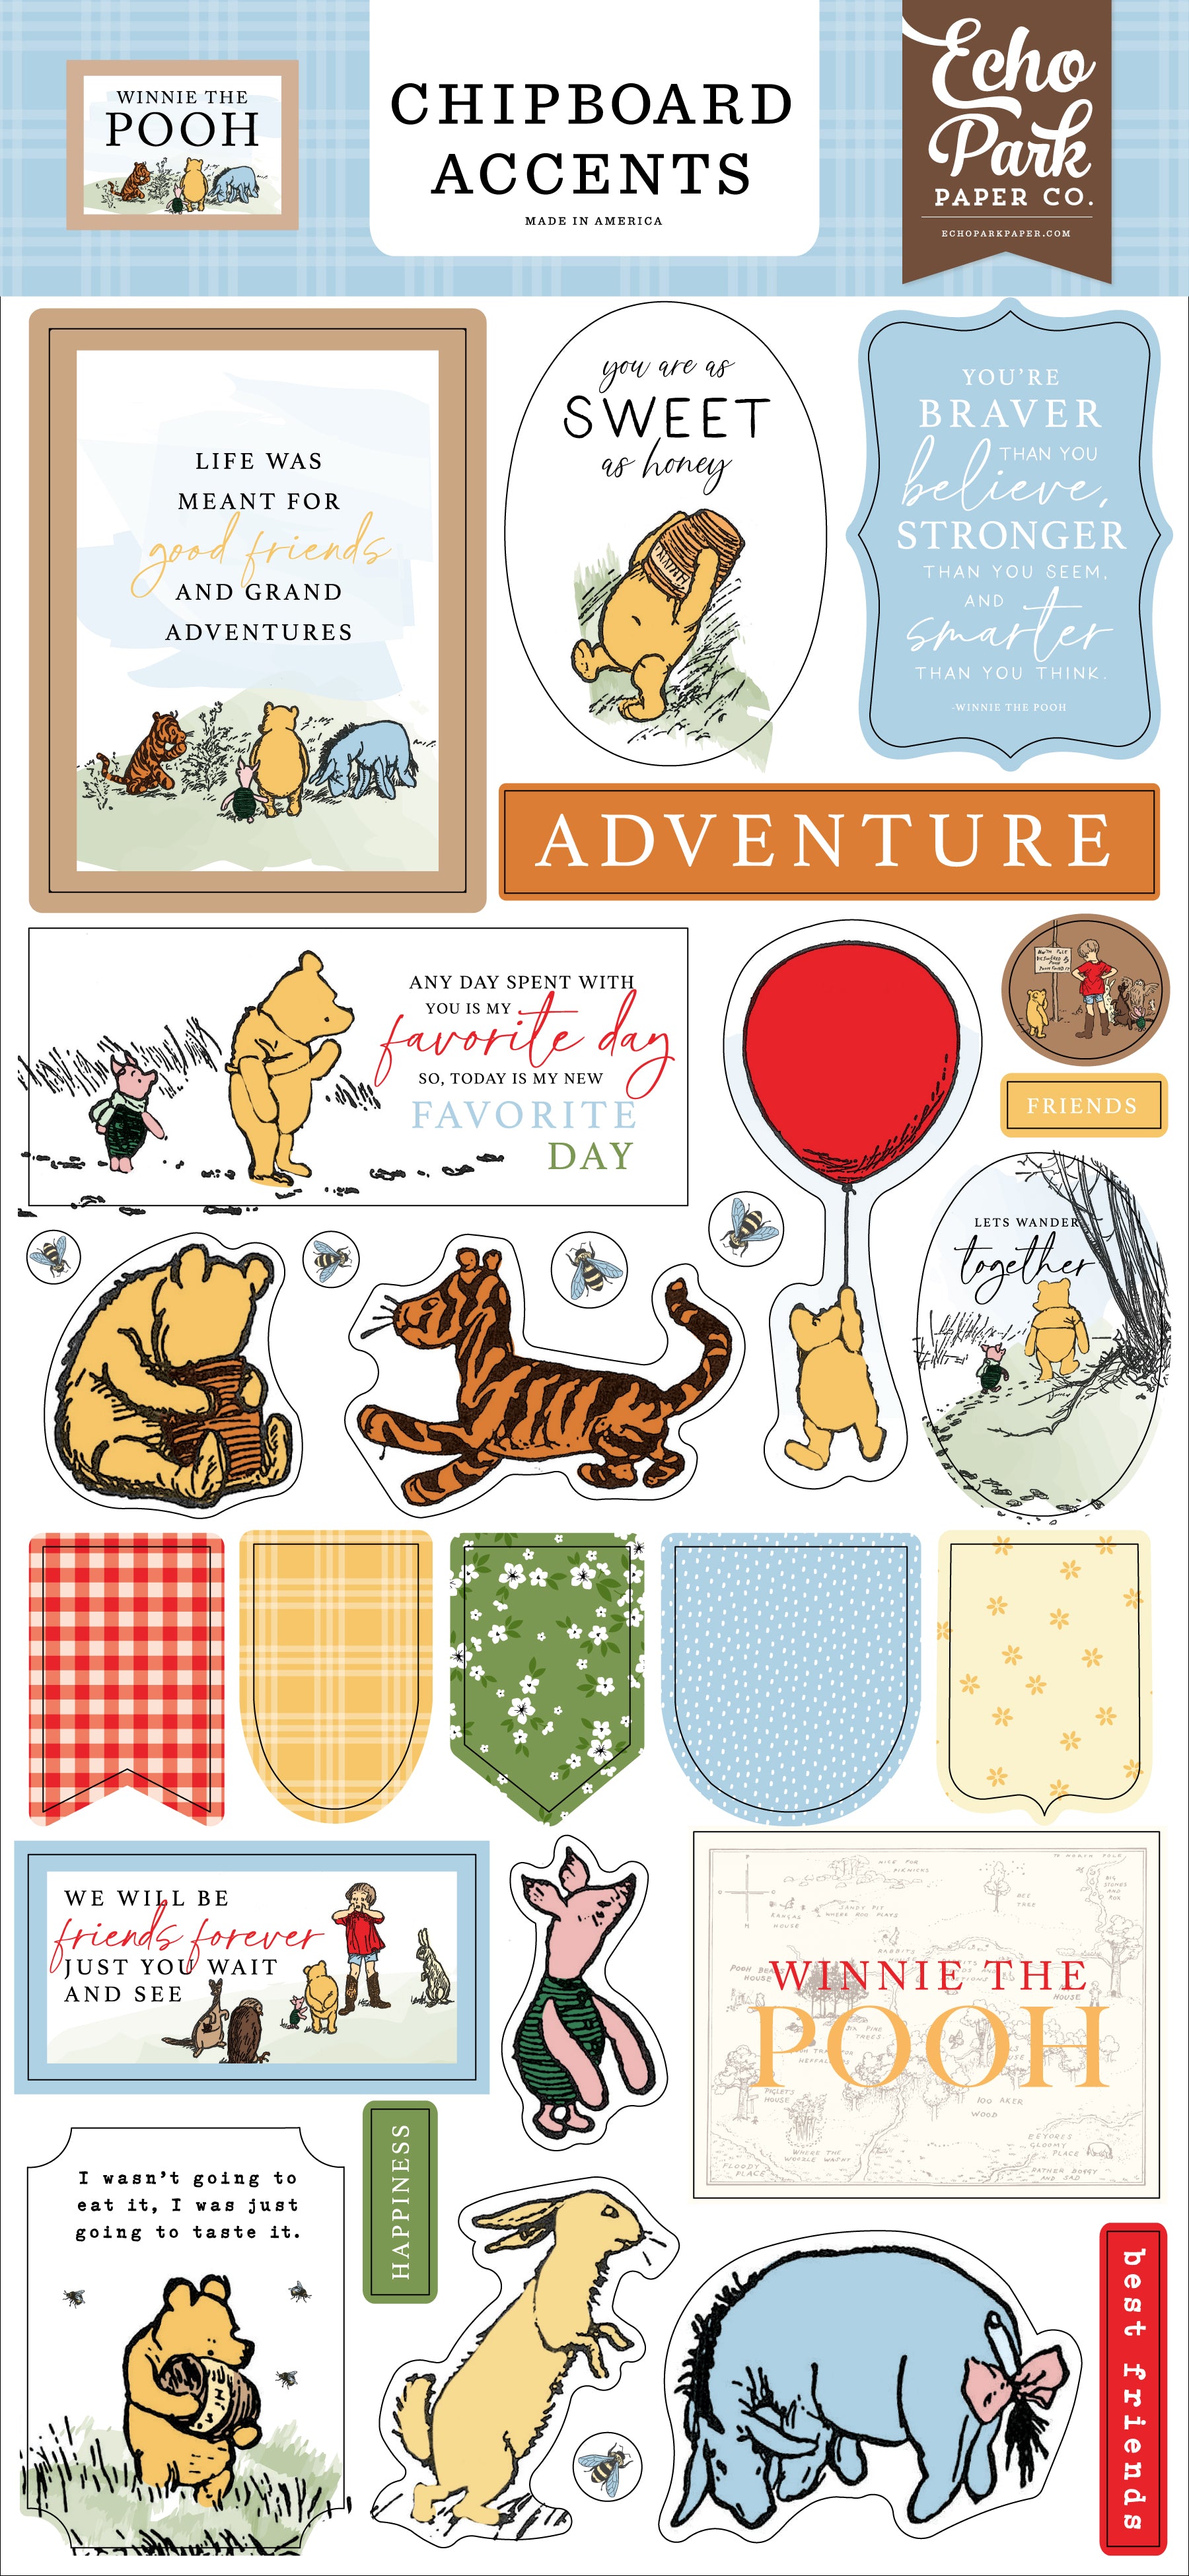 Winnie the Pooh Chipboard Accents